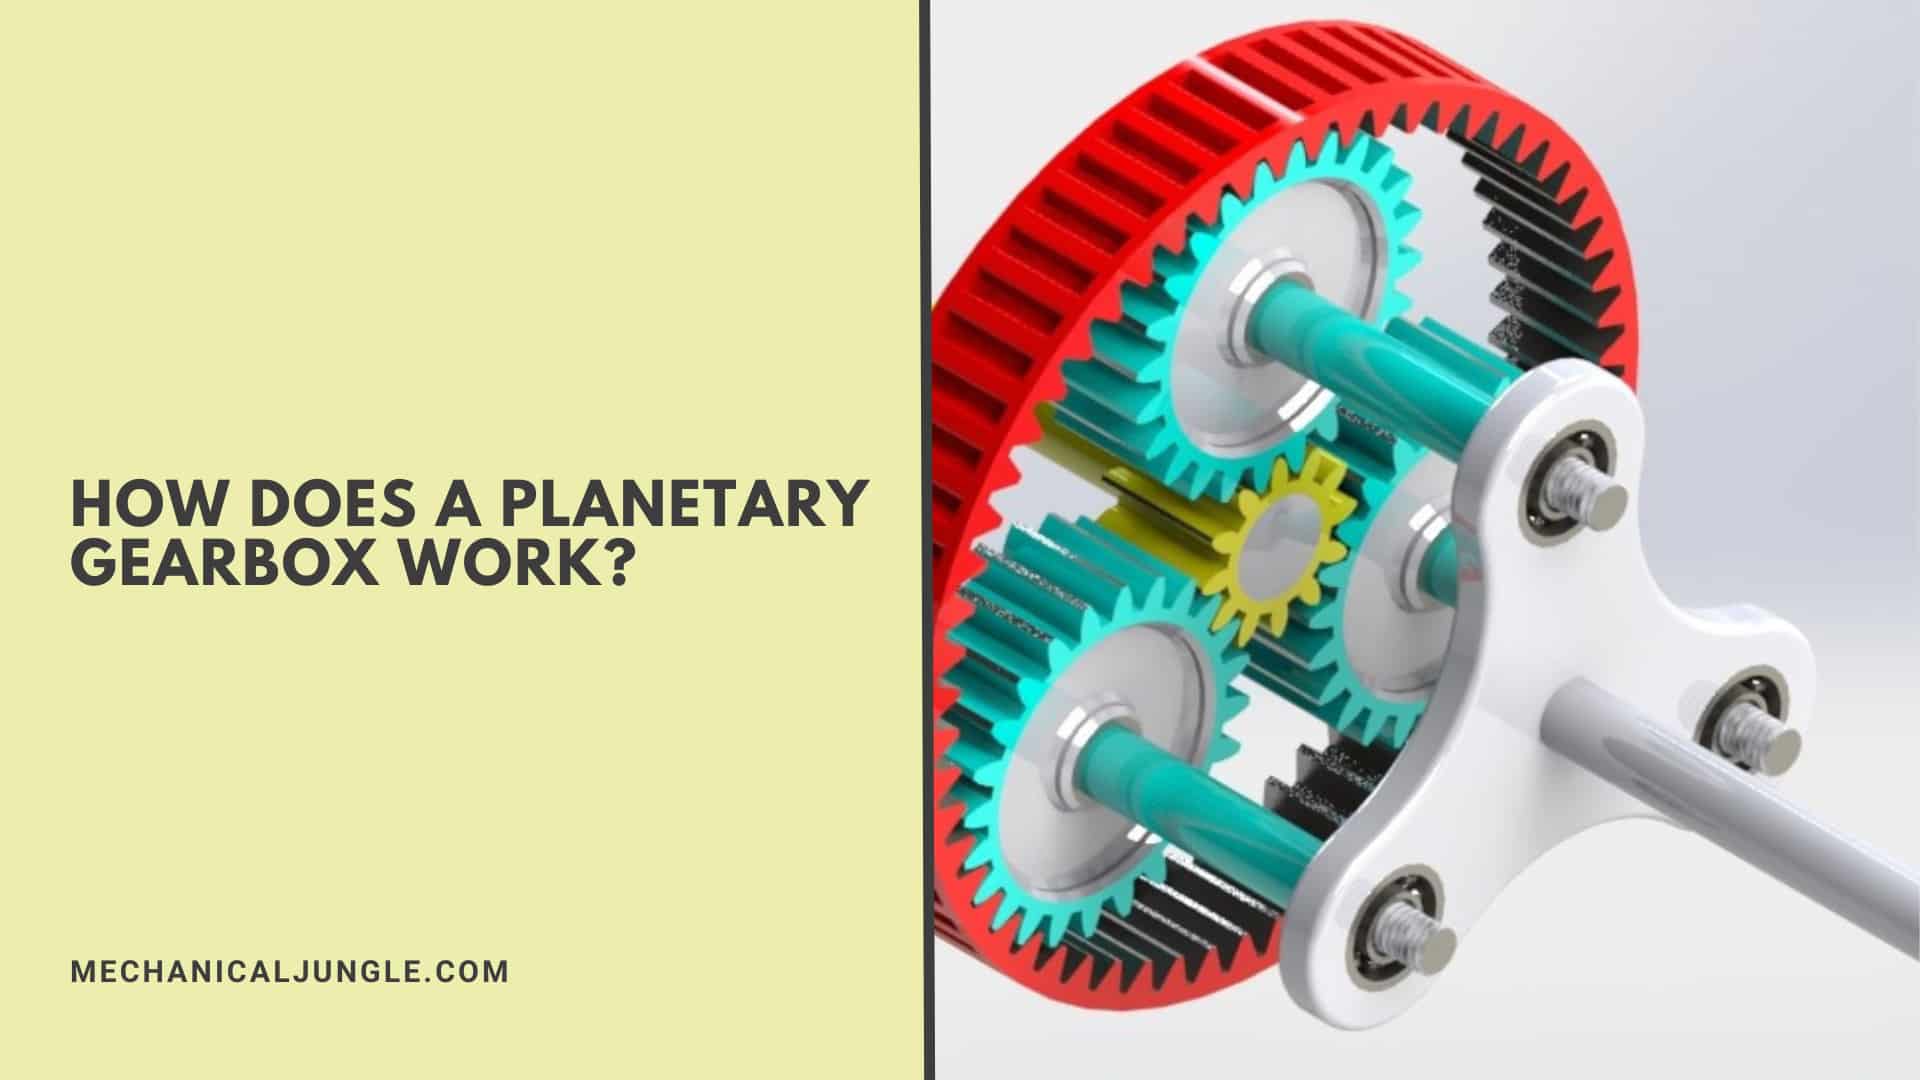 How Does a Planetary Gearbox Work?